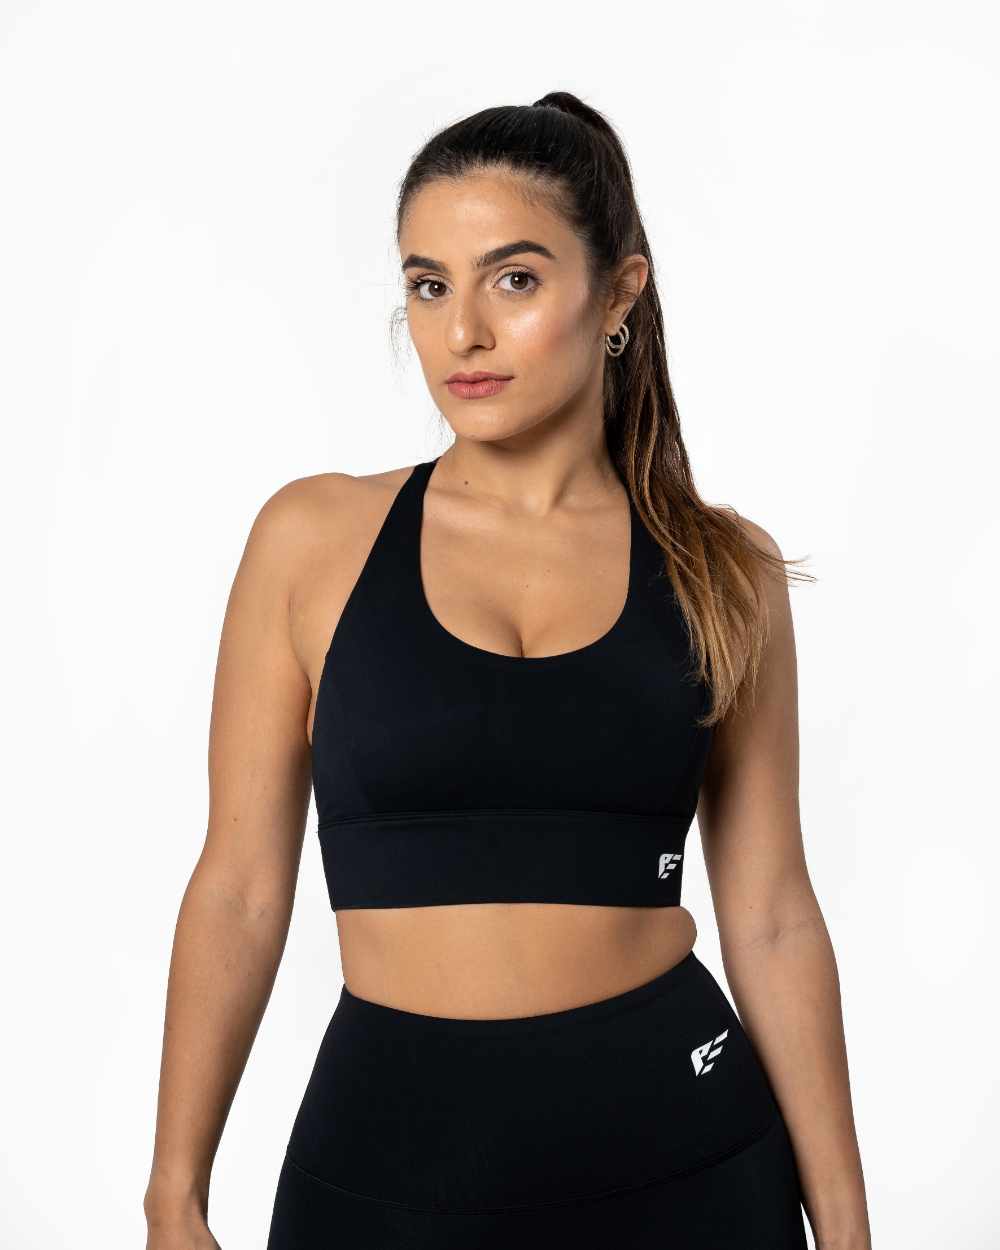 Champion Women's The Absolute Workout Double Dry Sports Bra, Black, M price  in UAE,  UAE